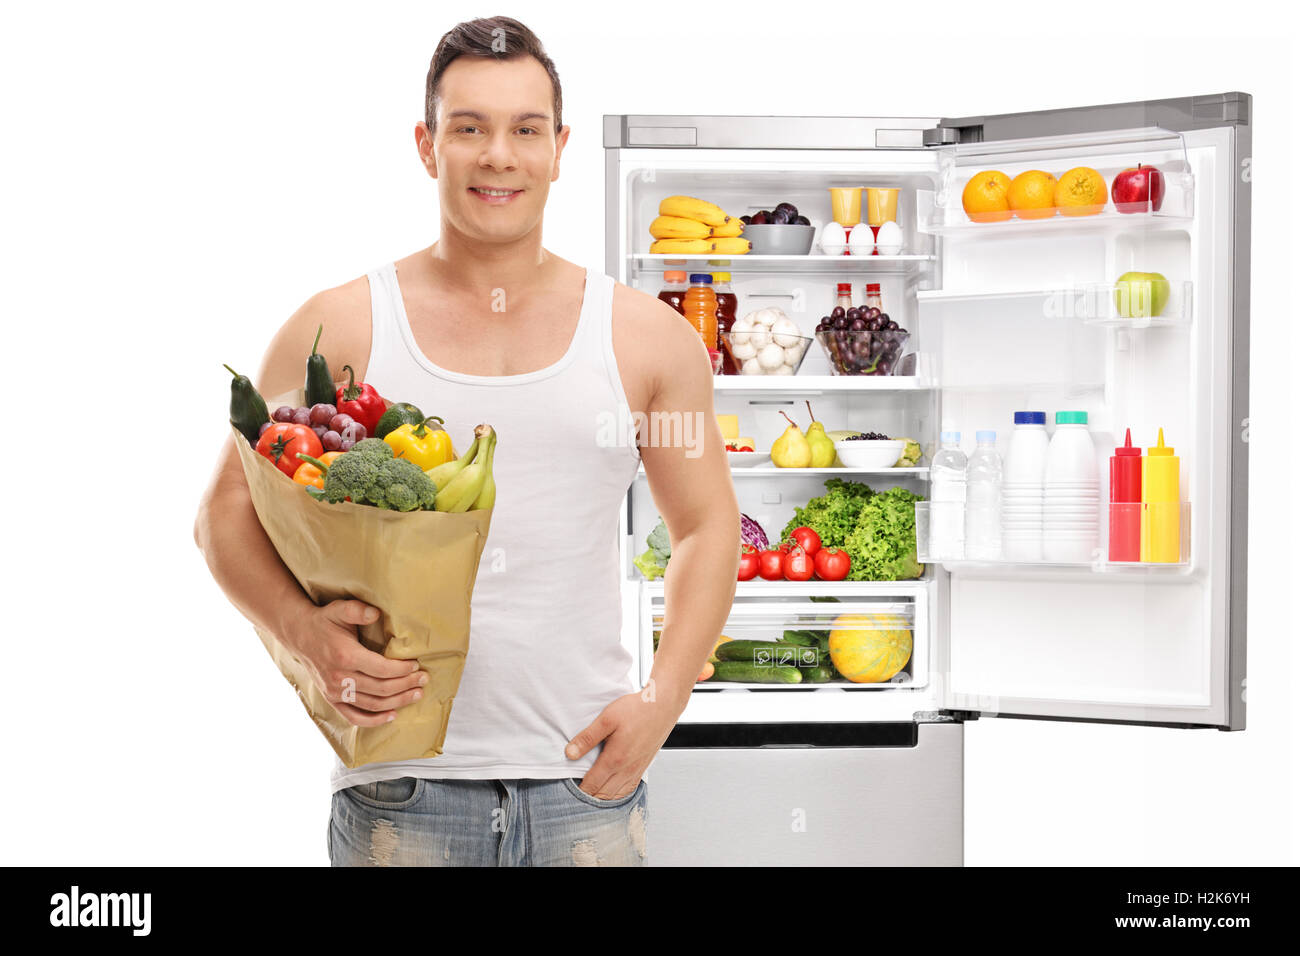 Man posing with a shopping bag full of groceries in front of an open fridge isolated on white background Stock Photo